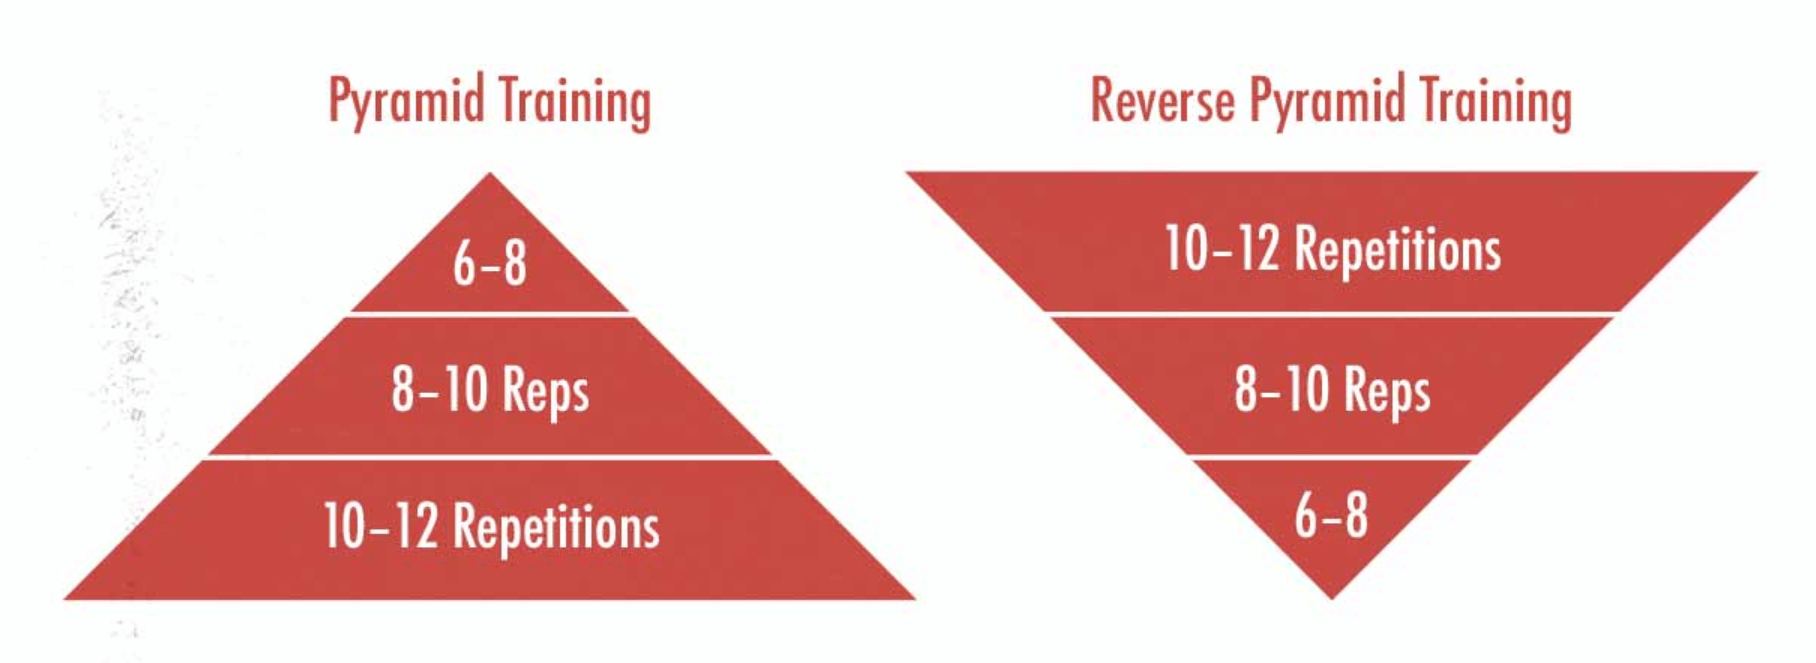 The main difference between reverse pyramid and pyramid training is the order in which weights are increased